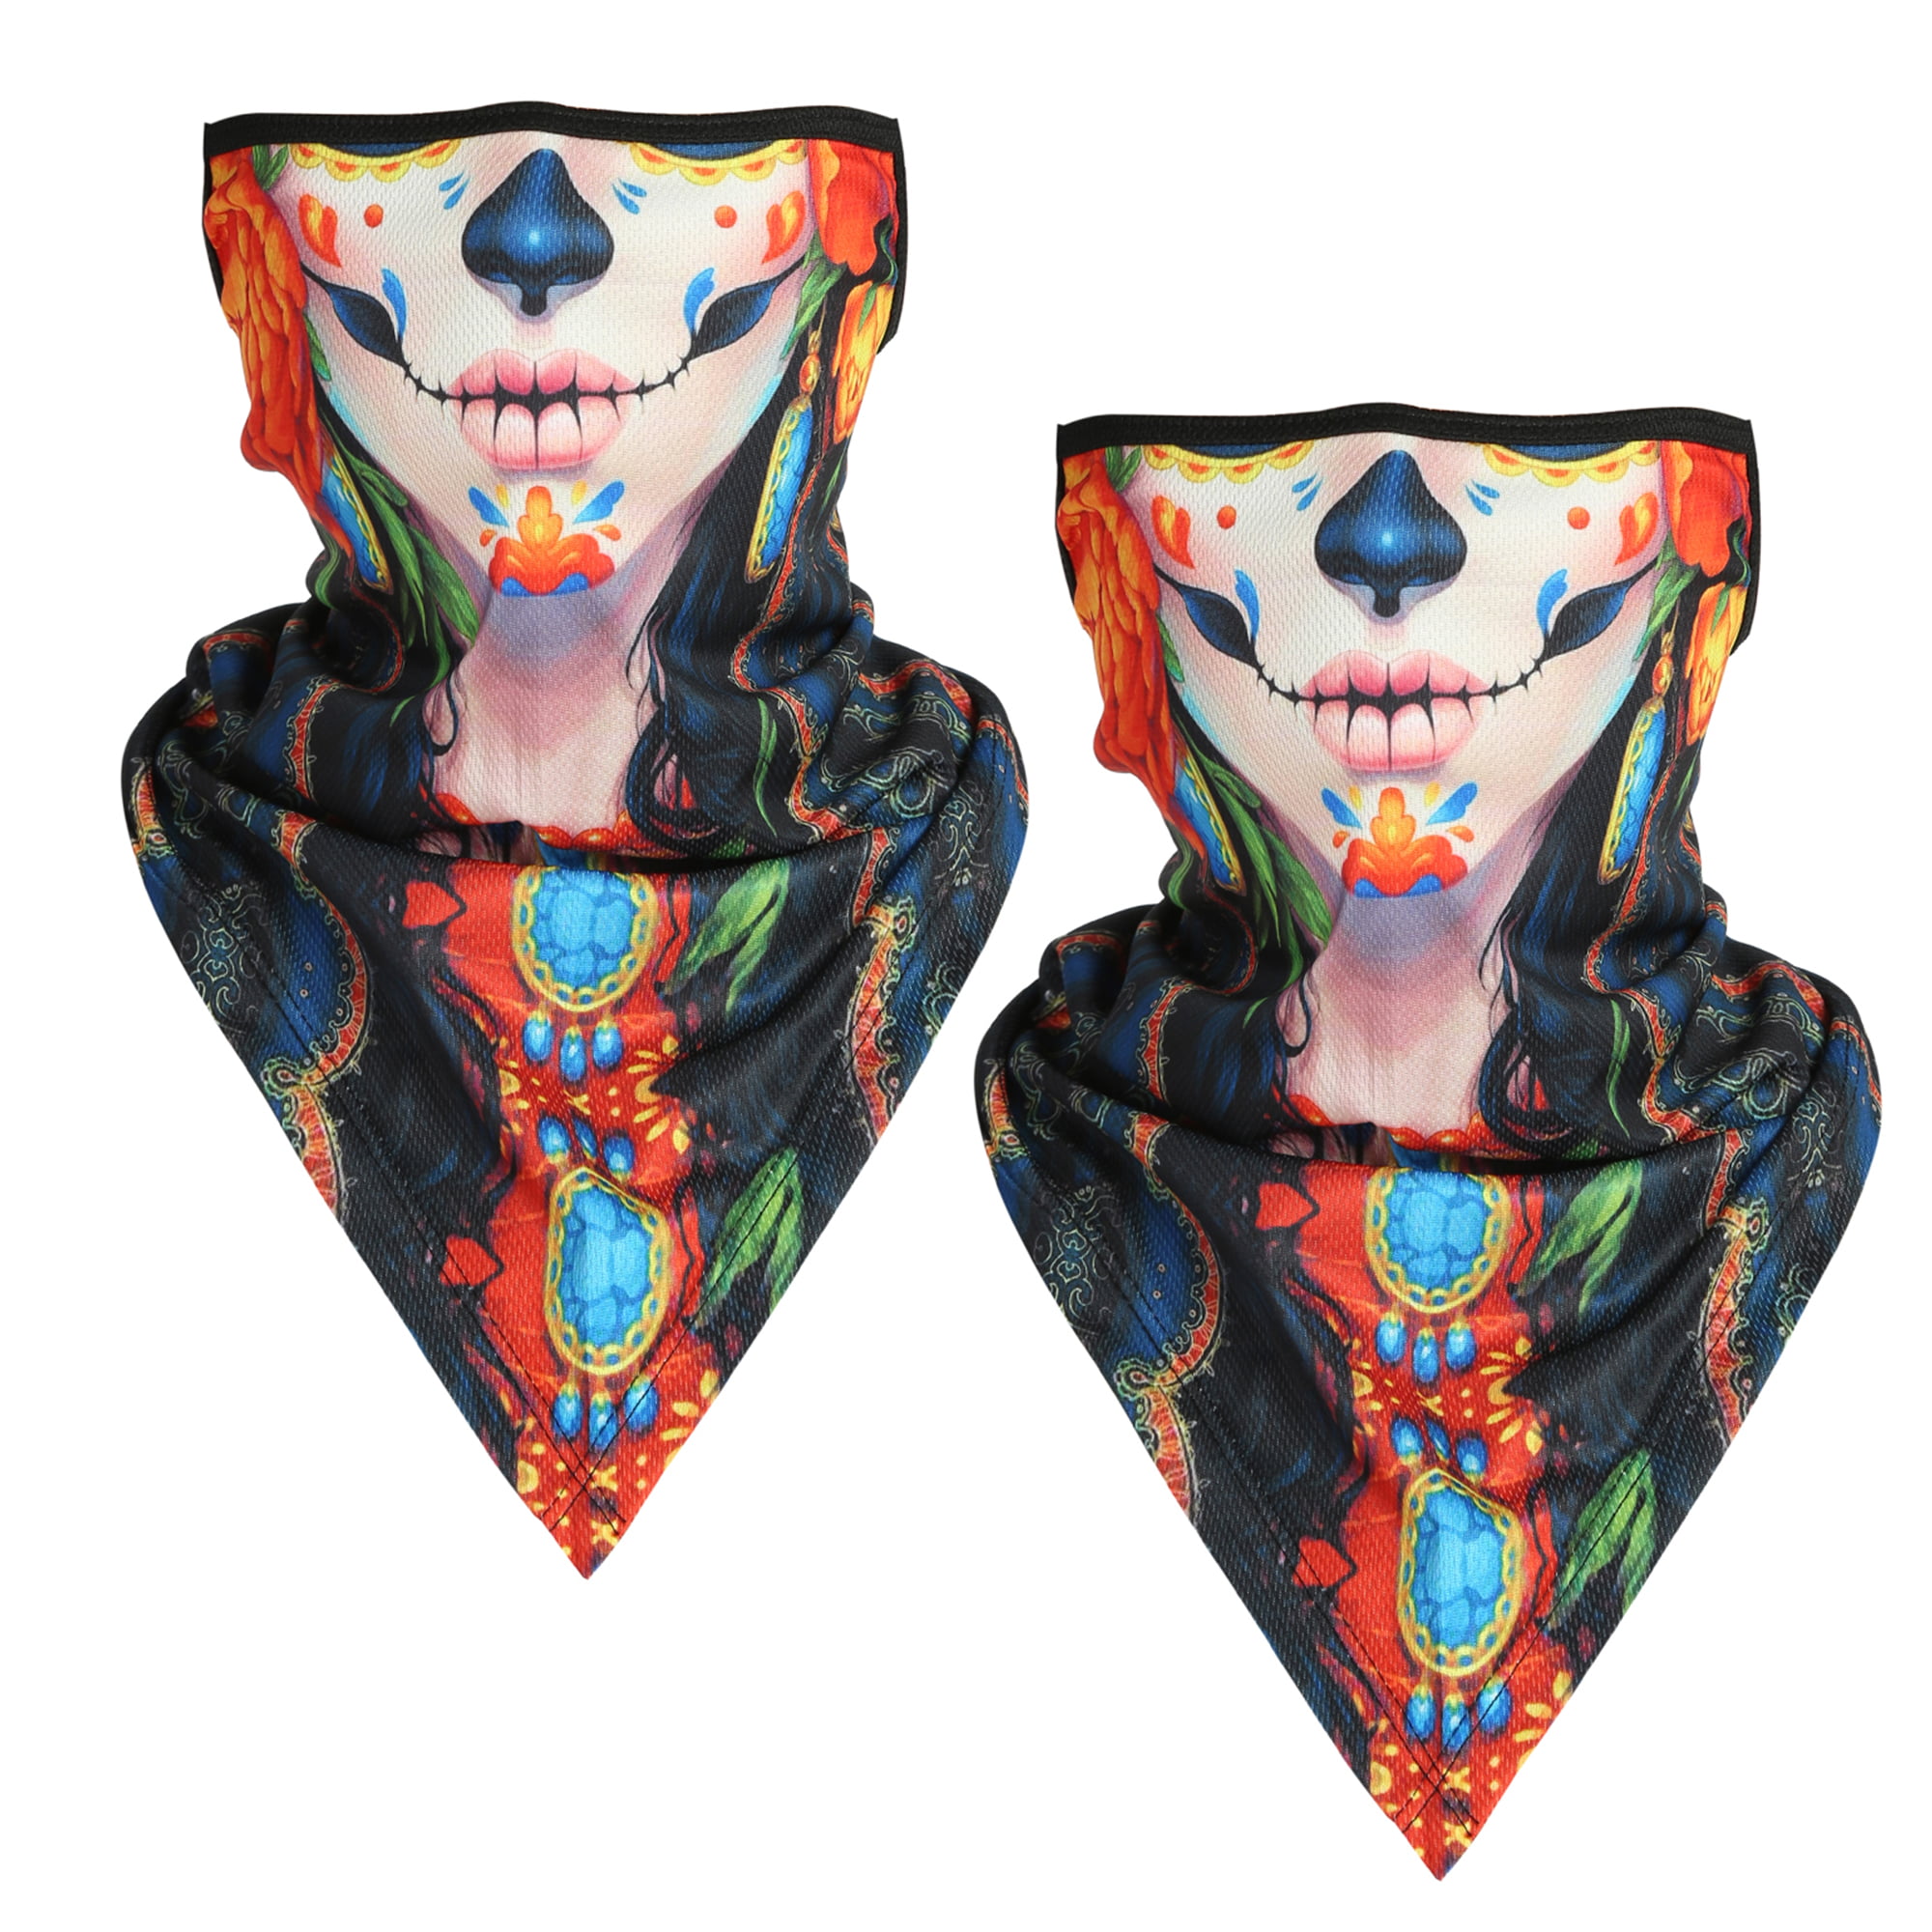 Details about   Moisture Wicking Bandana Face Mask Super Cooling Neck Gaiter Scarf With Loop Ear 